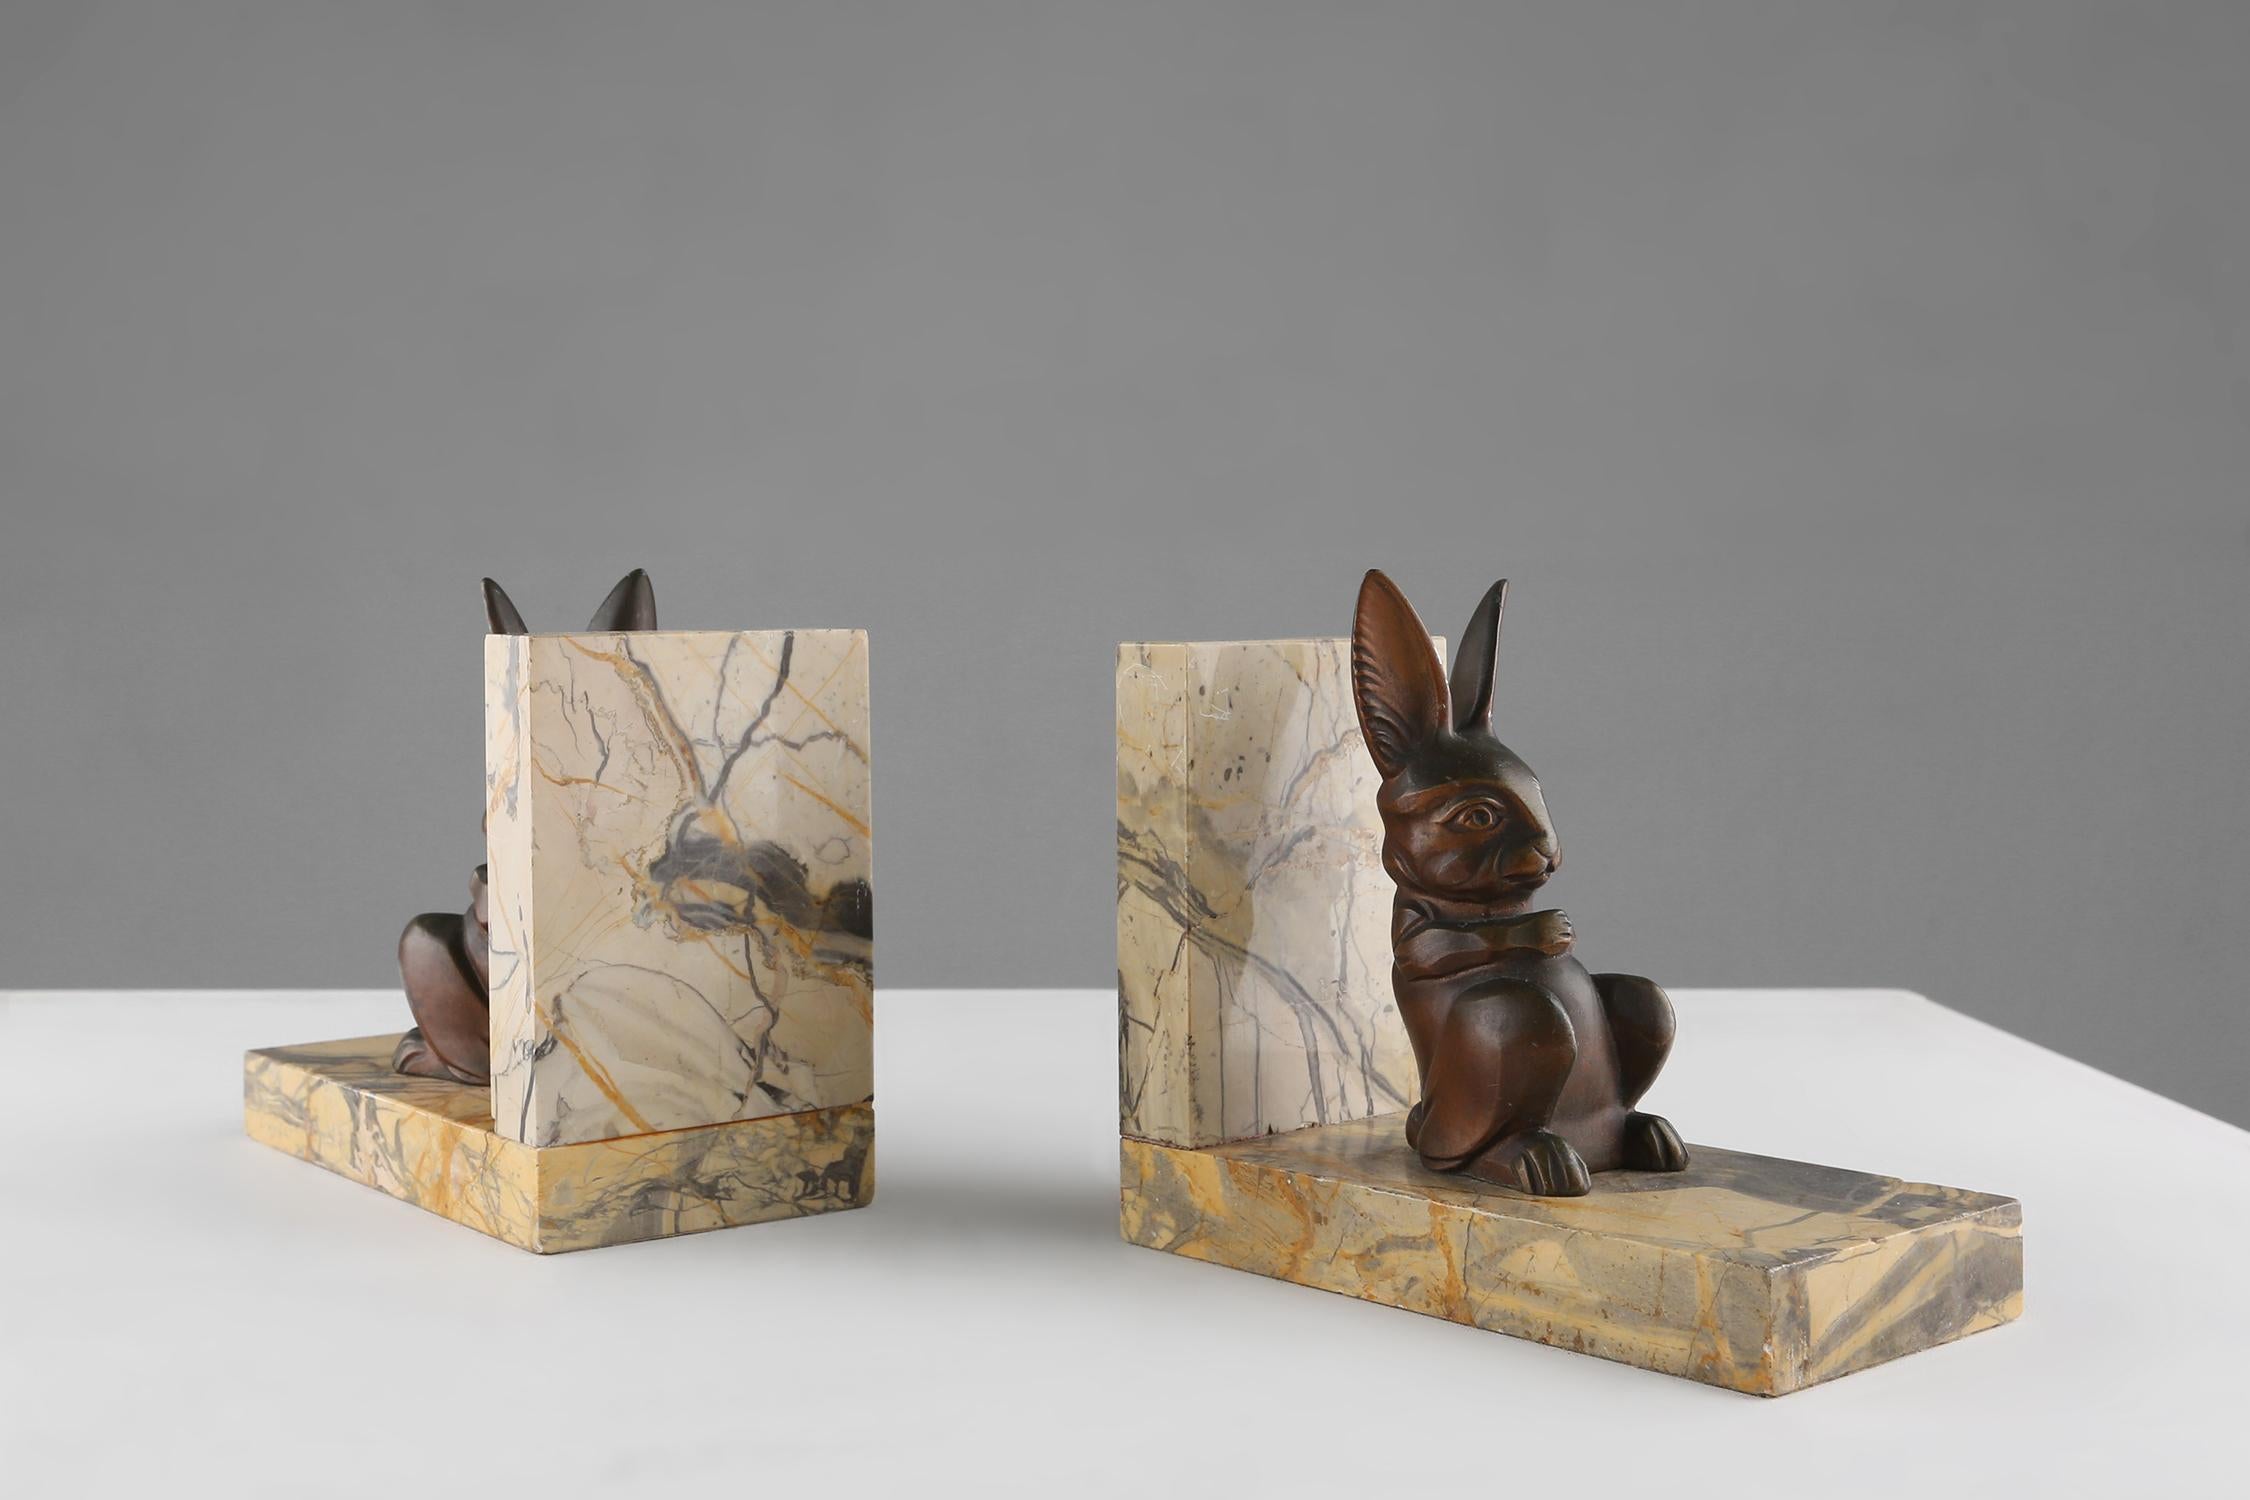 
Brighten up your bookcase with these stunning marble and bronze rabbit bookends. Made of high-quality marble and bronze, these bookends have a charming design that will brighten up any room. The marble base is sturdy and solid, and has a natural